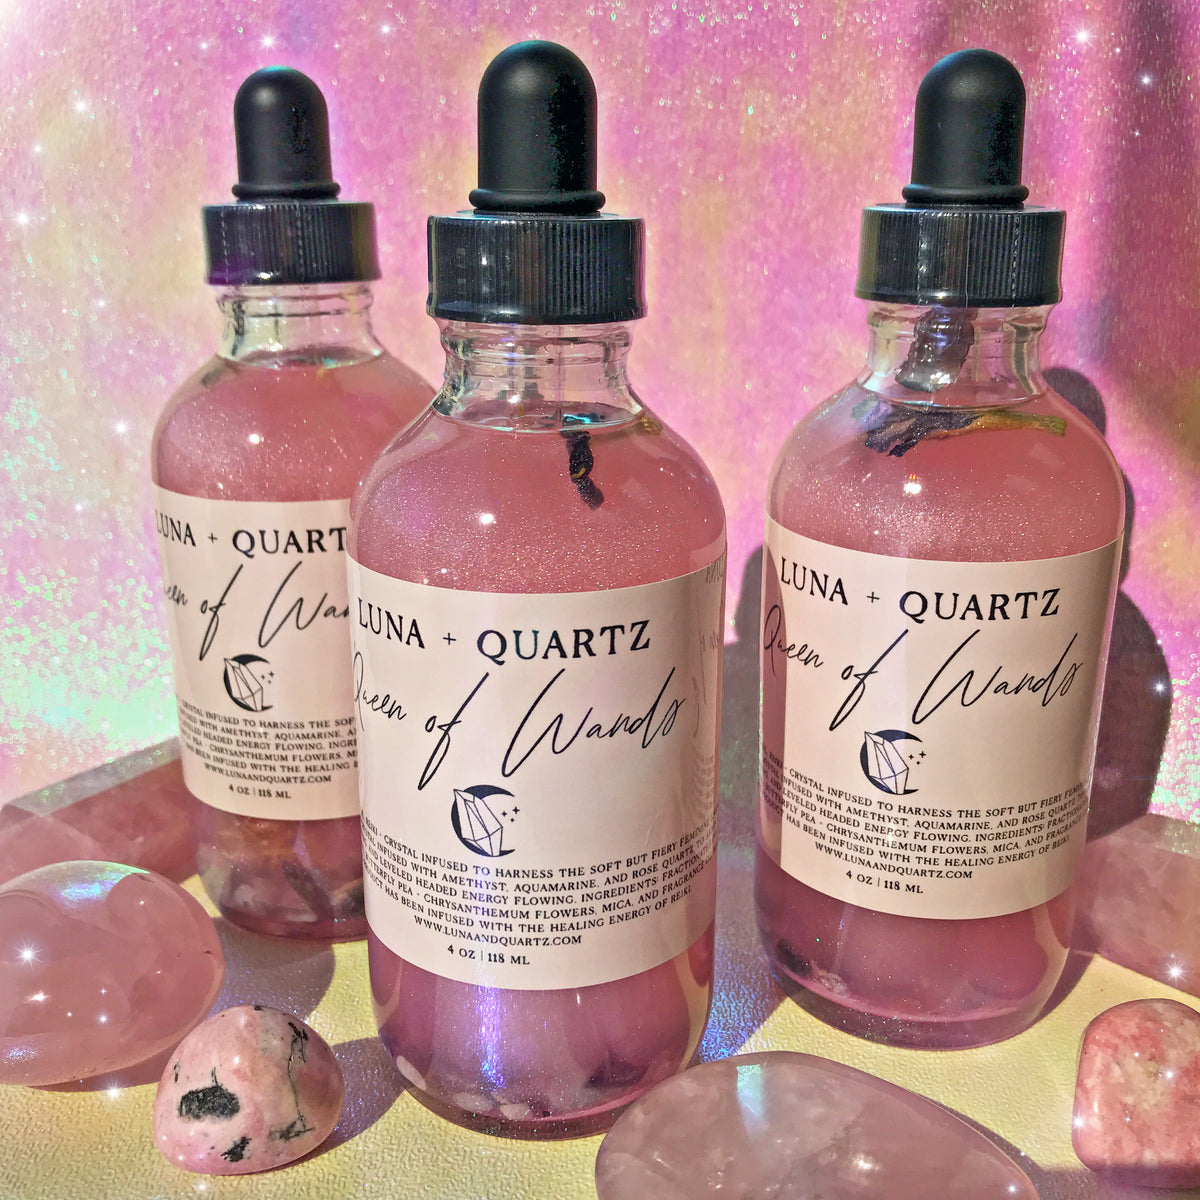 Queen of Wands Crystal Infused Body Oil